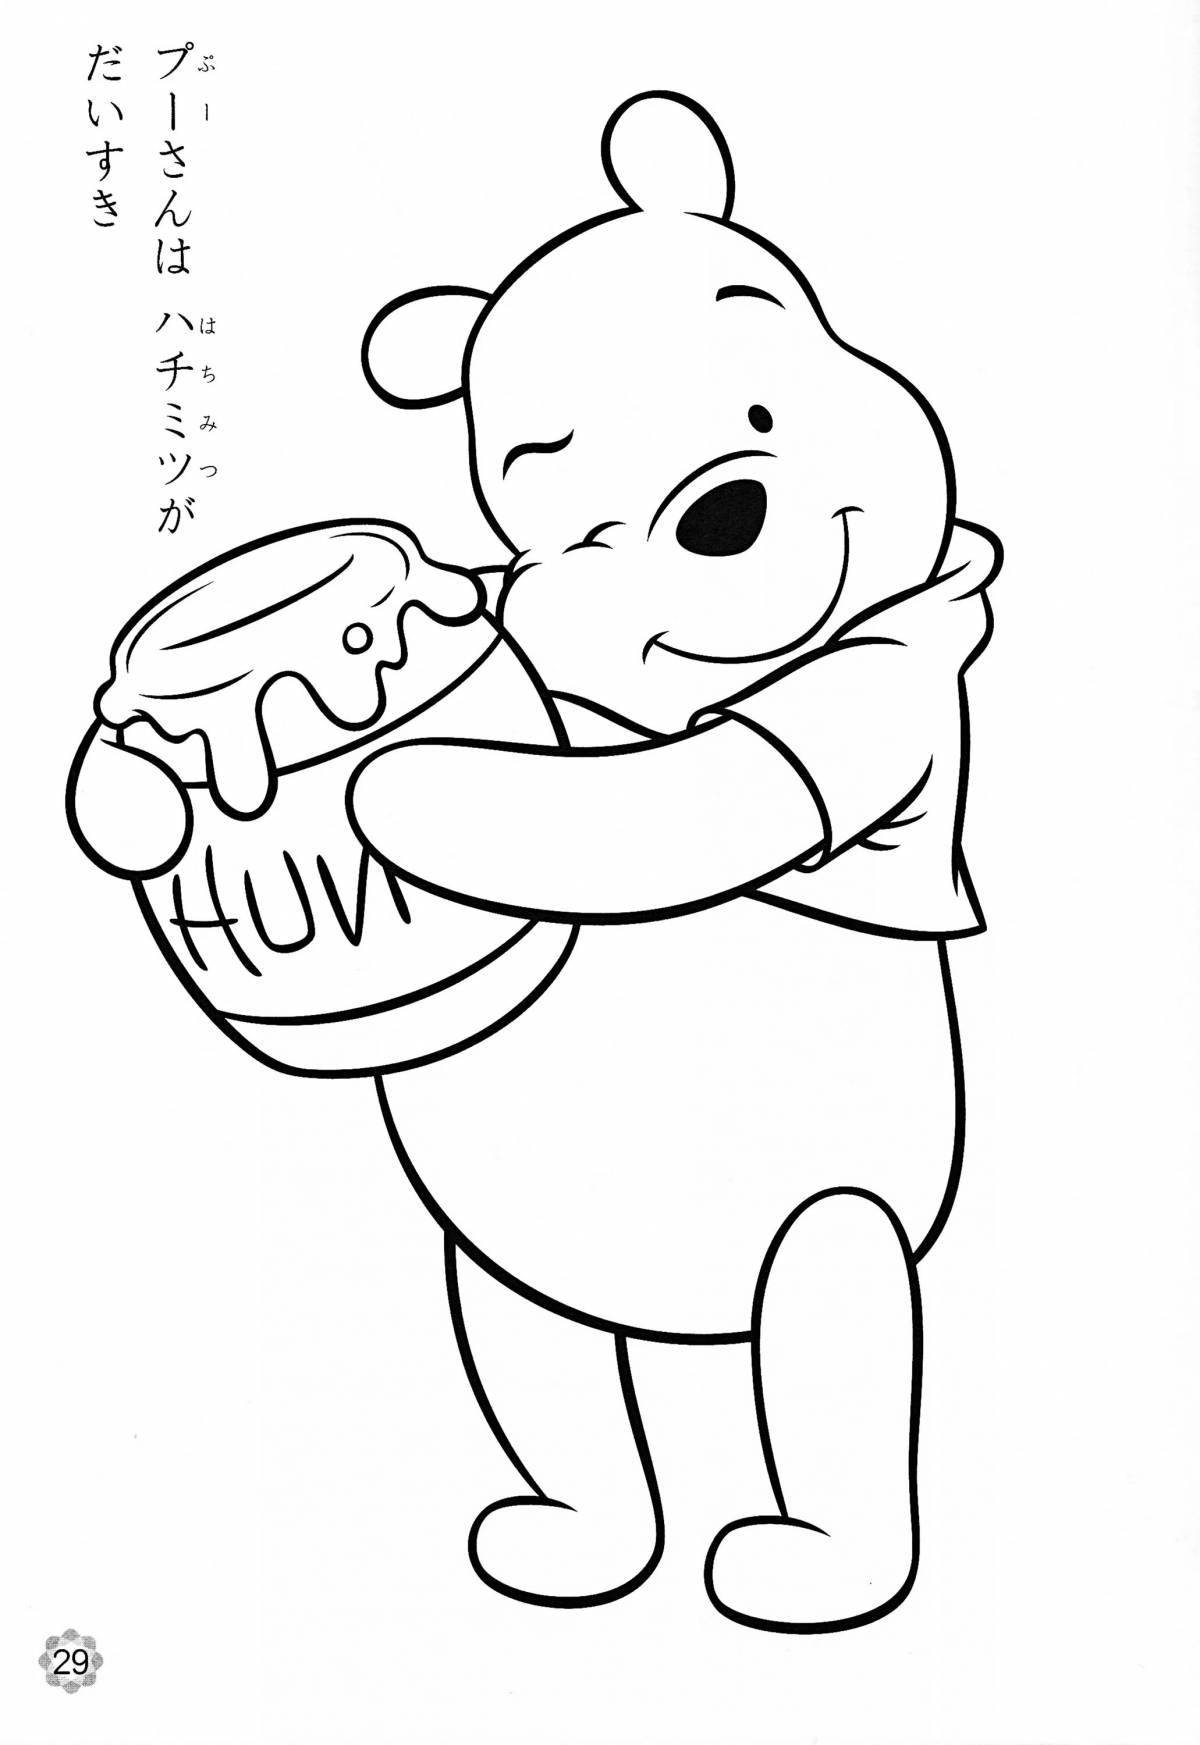 Disney character coloring page